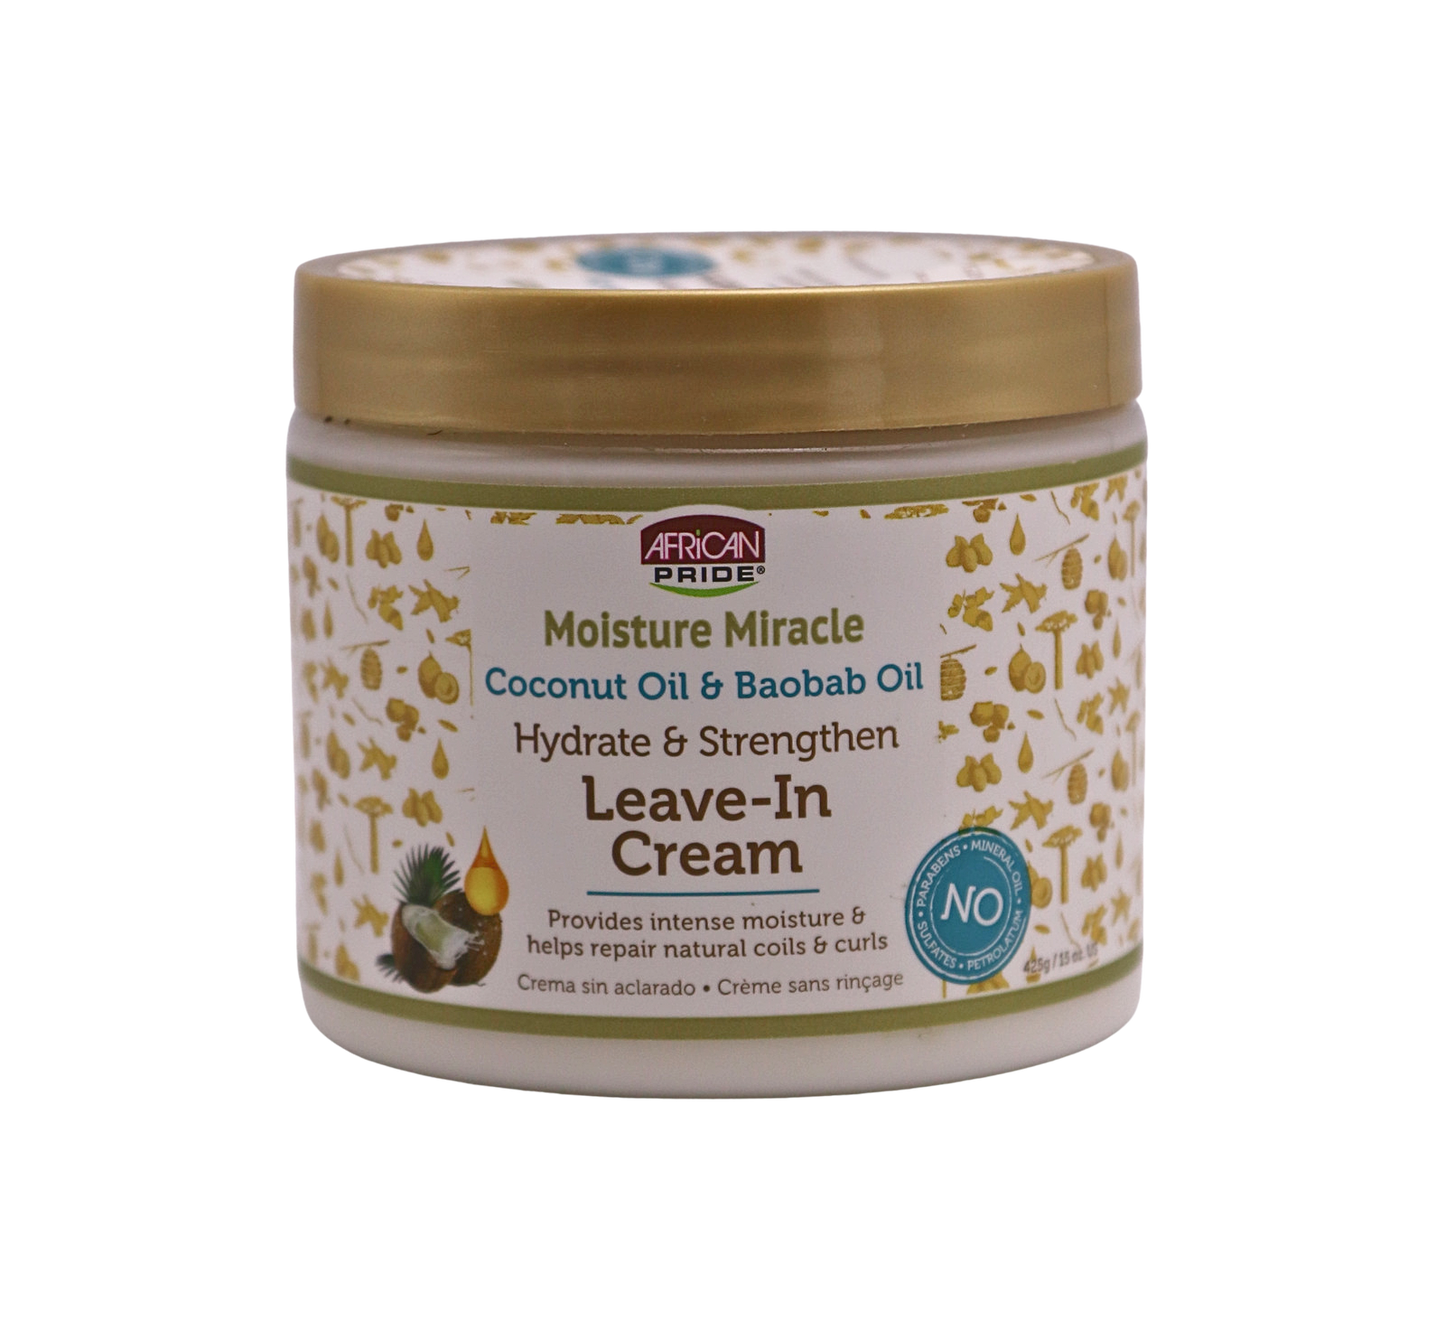 Moisture Miracle Coconut Oil & Baobab Oil Hydrate & Strengthen  LEAVE-IN CREAM